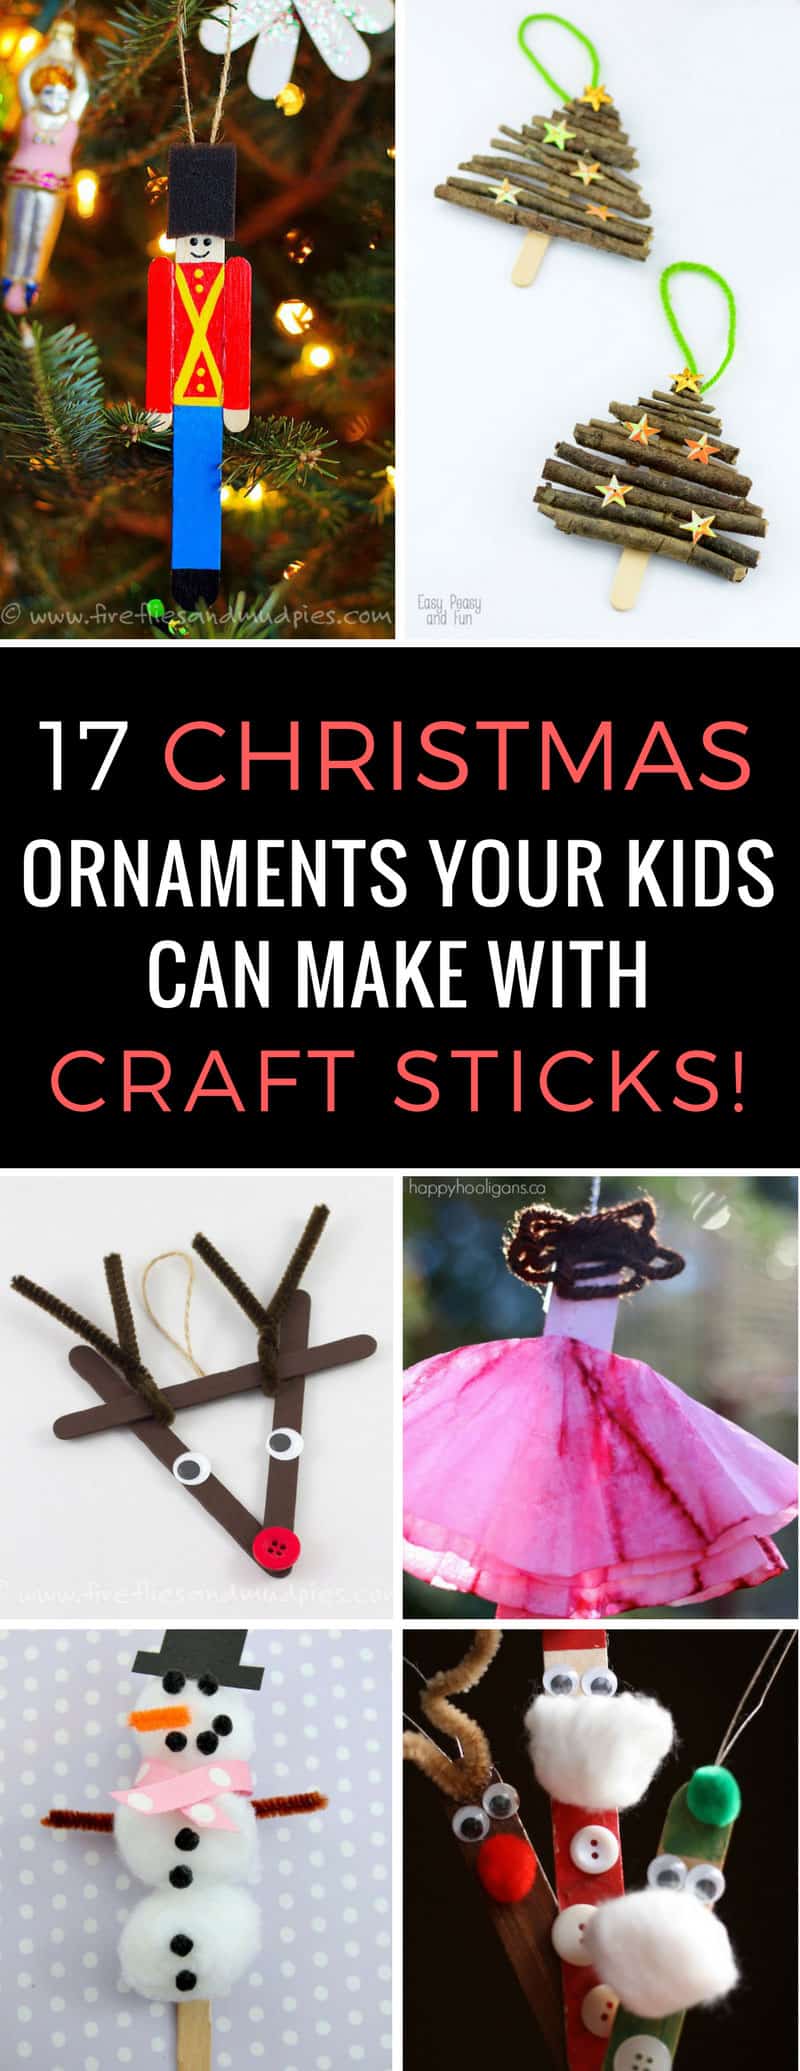 Popsicle Christmas ornaments have to be the easiest craft projects for kids to make in the Holidays and these are all so adorable I need to go to the Dollar Tree to get more craft sticks!